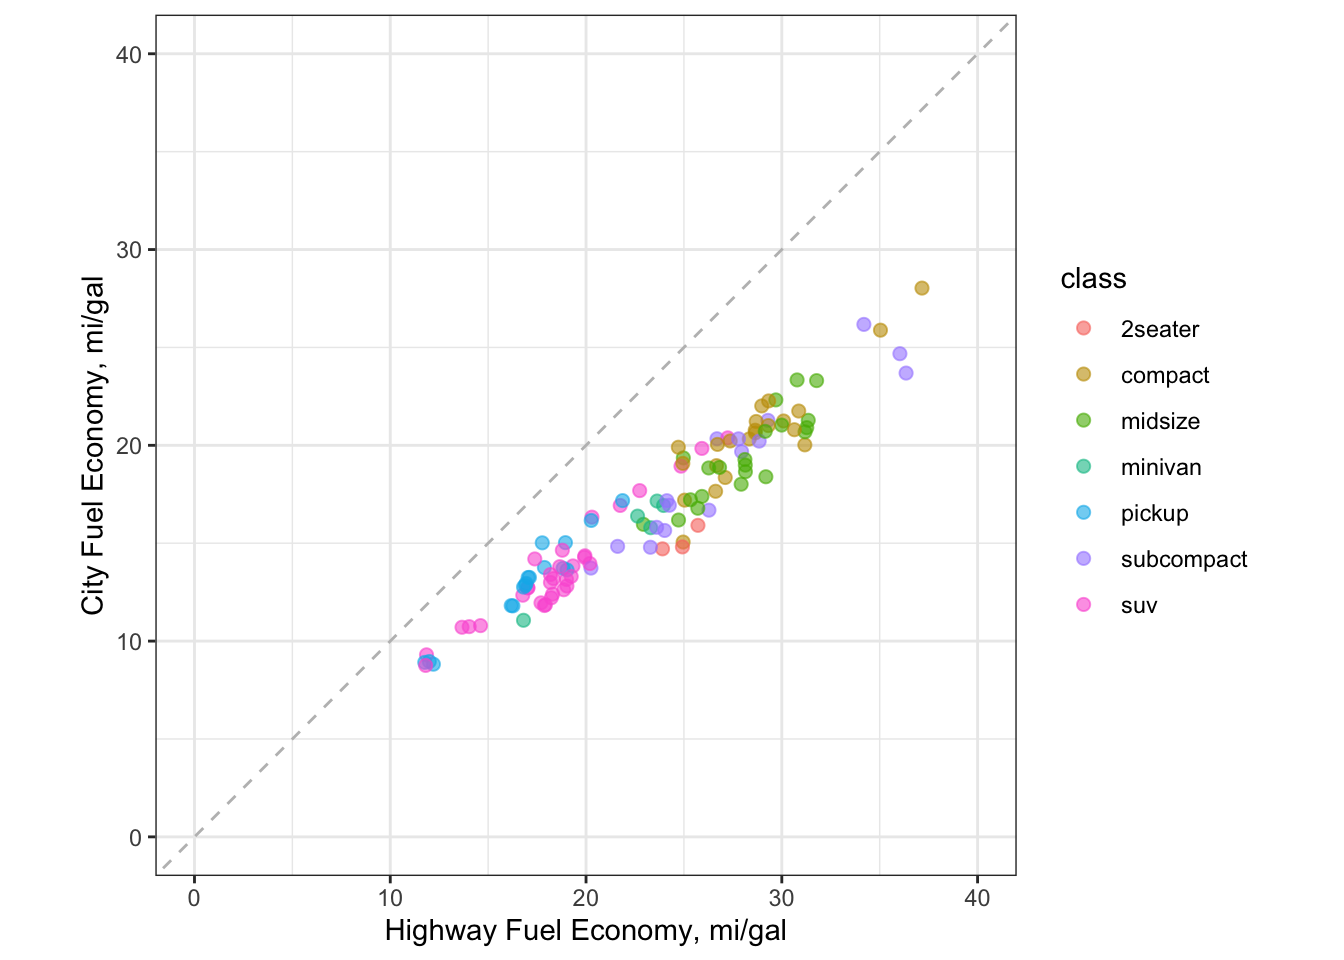 Scatterplot (geom_jitter) of highway vs. city fuel economy for model year 2008, colored by vehicle type